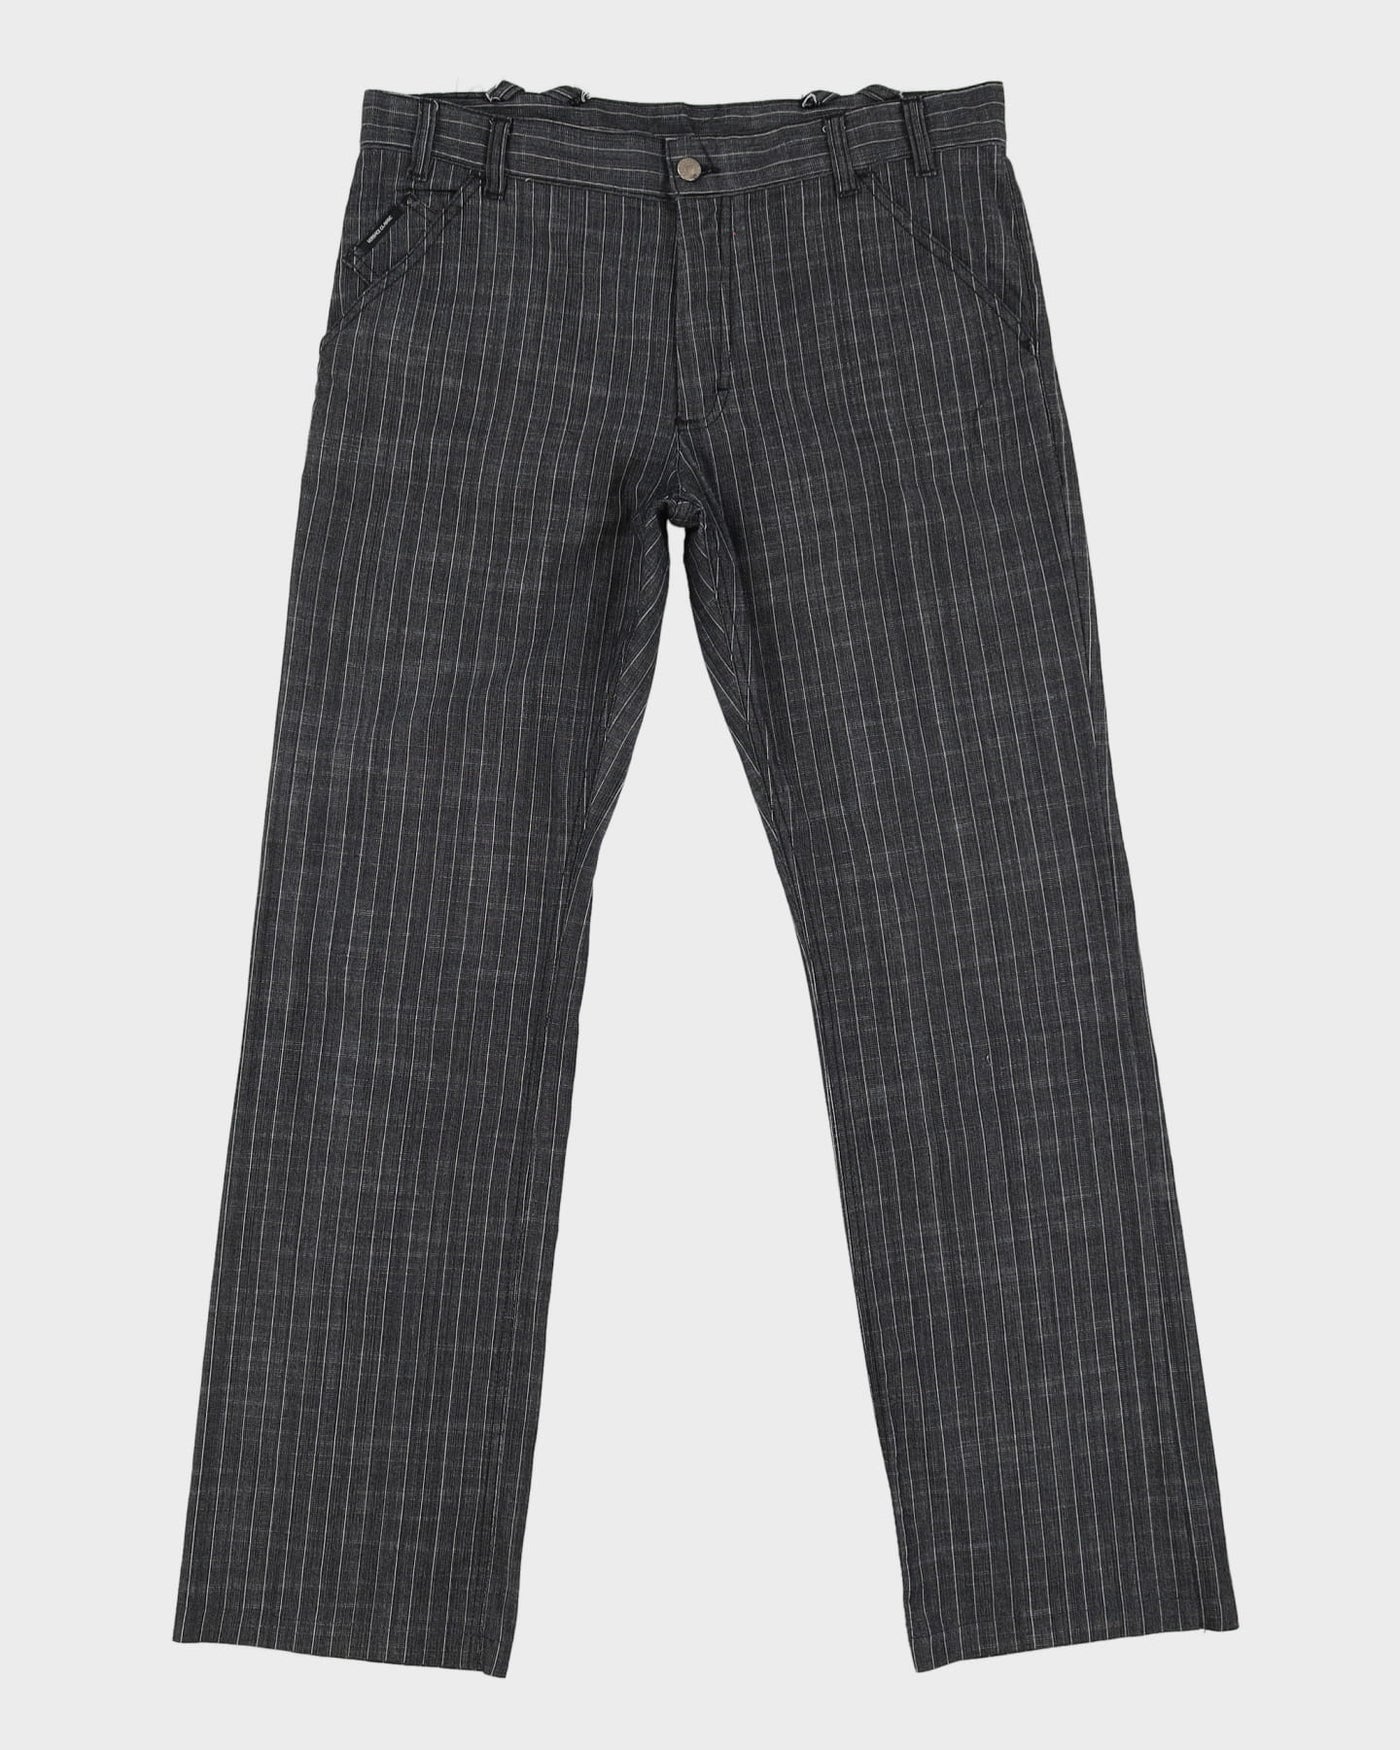 Versace Classic Grey Pinstripe Patterned Trousers - W34 L32